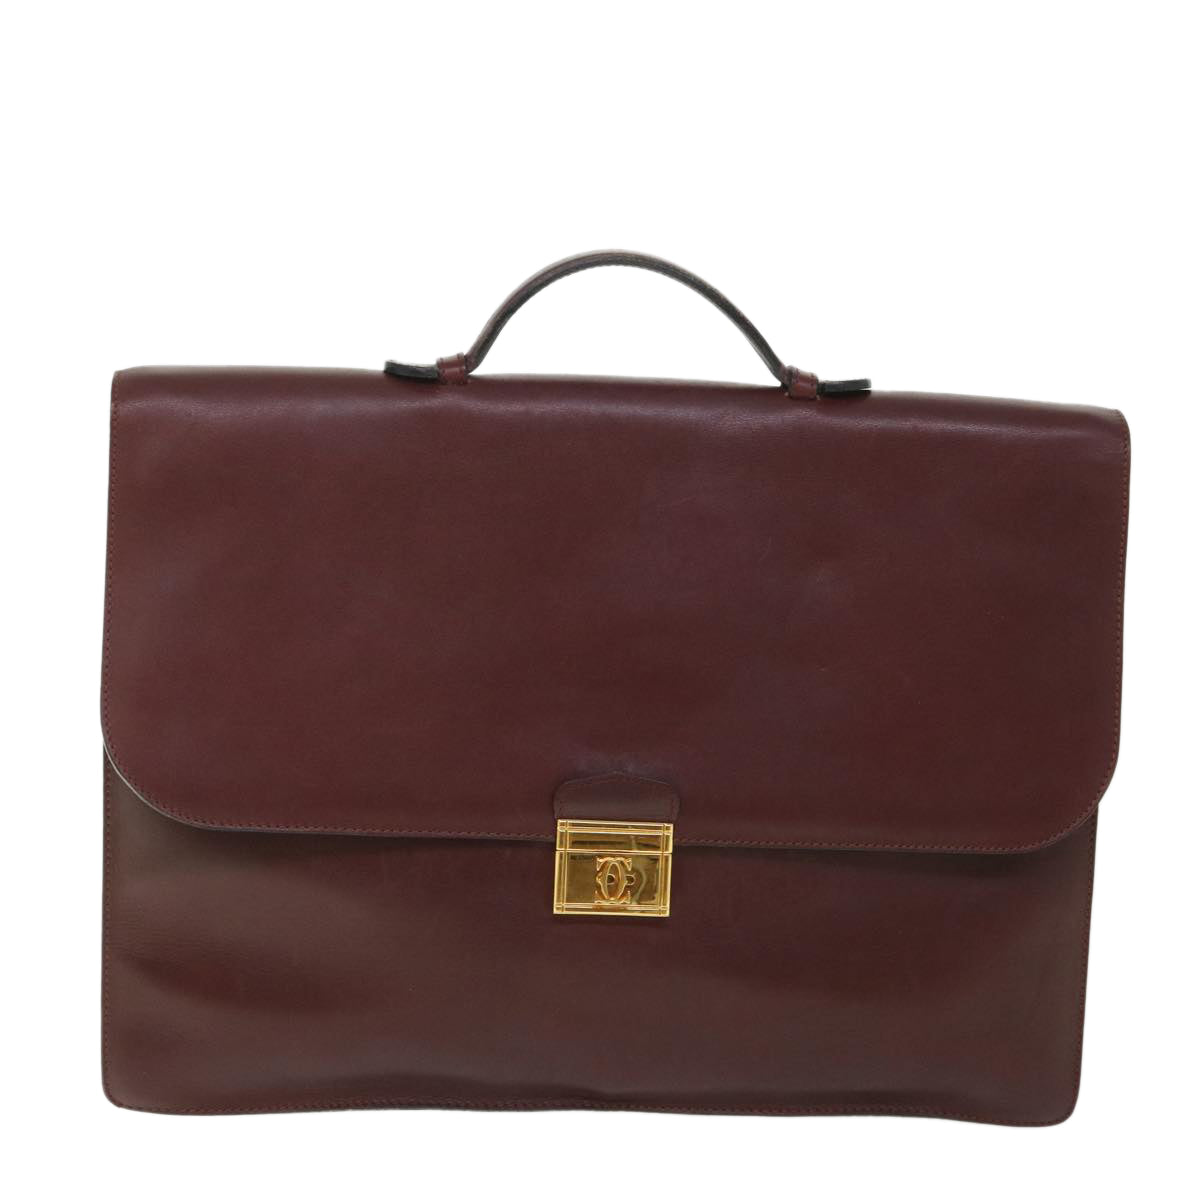 CARTIER Business Bag Leather Wine Red Auth bs8739